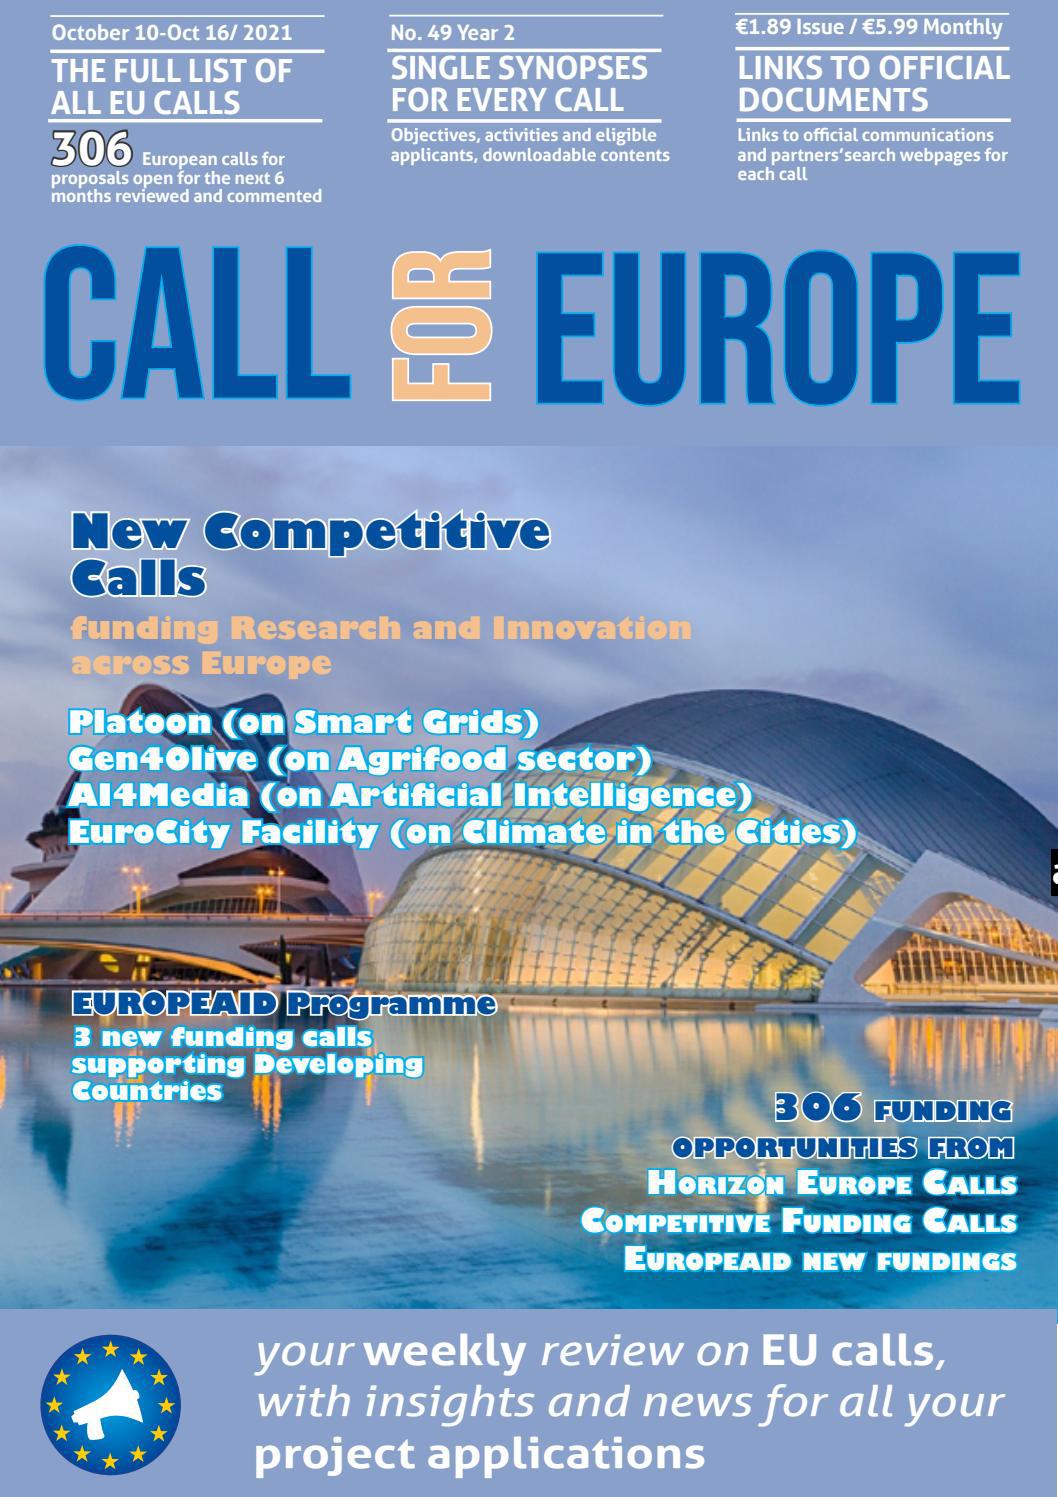 CallforEurope - 10th October 2021 Edition Weekly Magazine